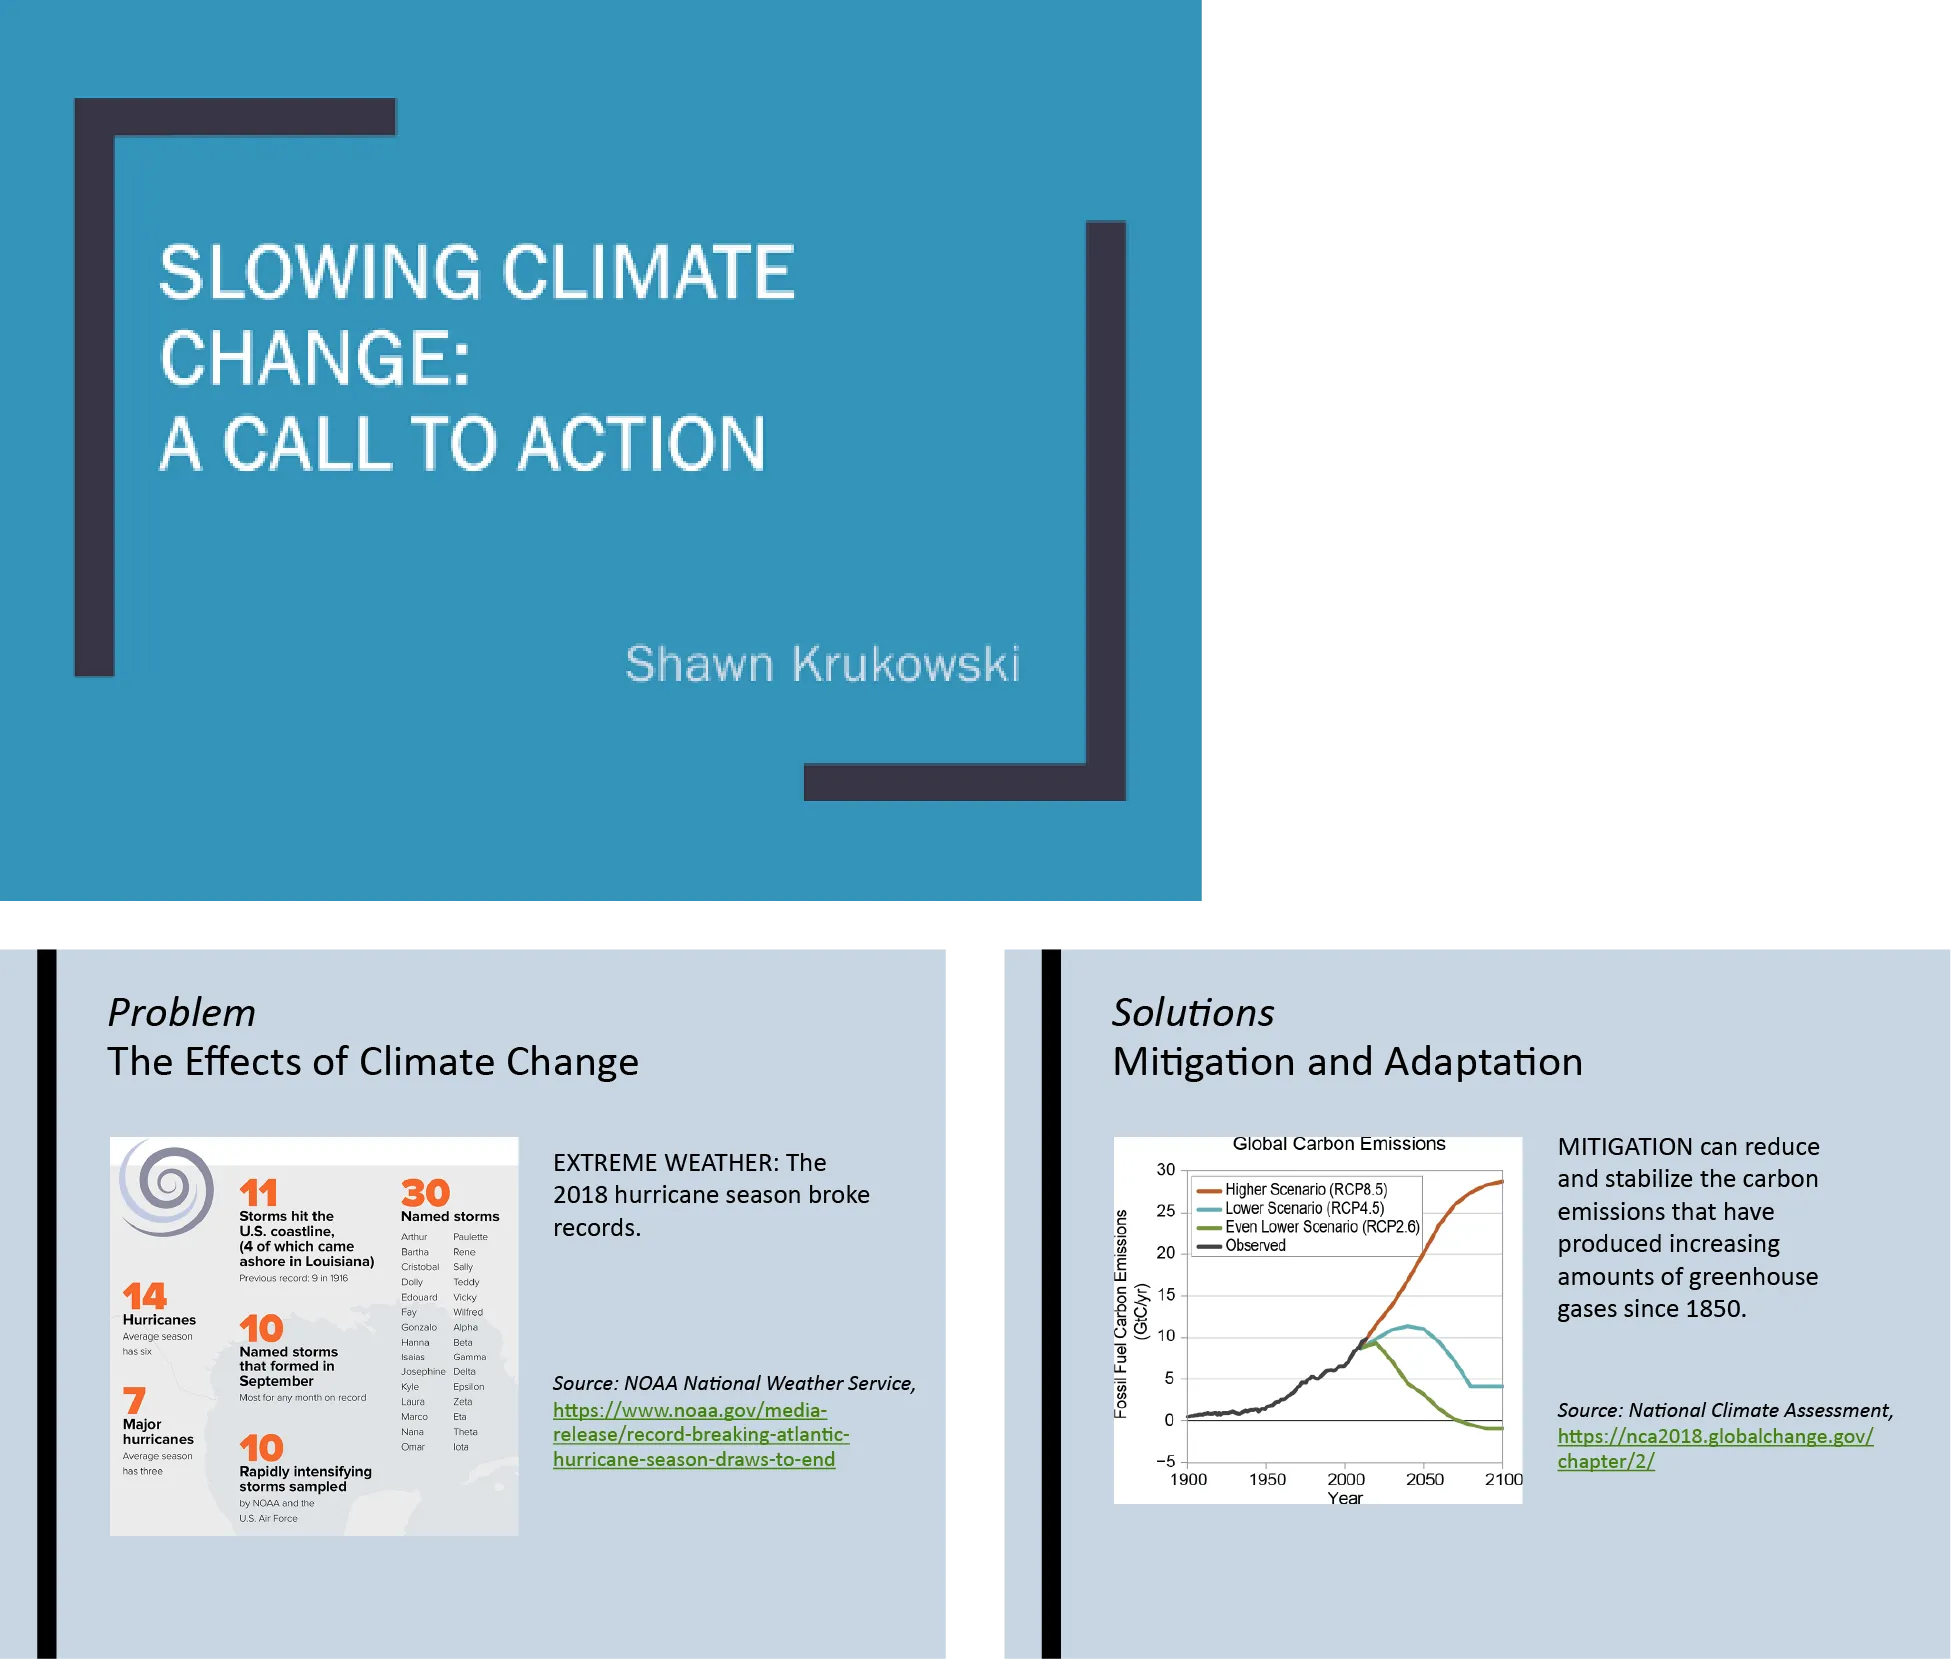 Shawn Krukowski adapted the proposal for a presentation. One slide shows the title SLOWING CLIMATE CHANGE: A CALL TO ACTION. The second slide shows an infographic of the 2020 hurricane season in the Atlantic Ocean with specific numbers and the named storms. The third slide shows a graphical representation of the global carbon emissions in the Industrial Age.